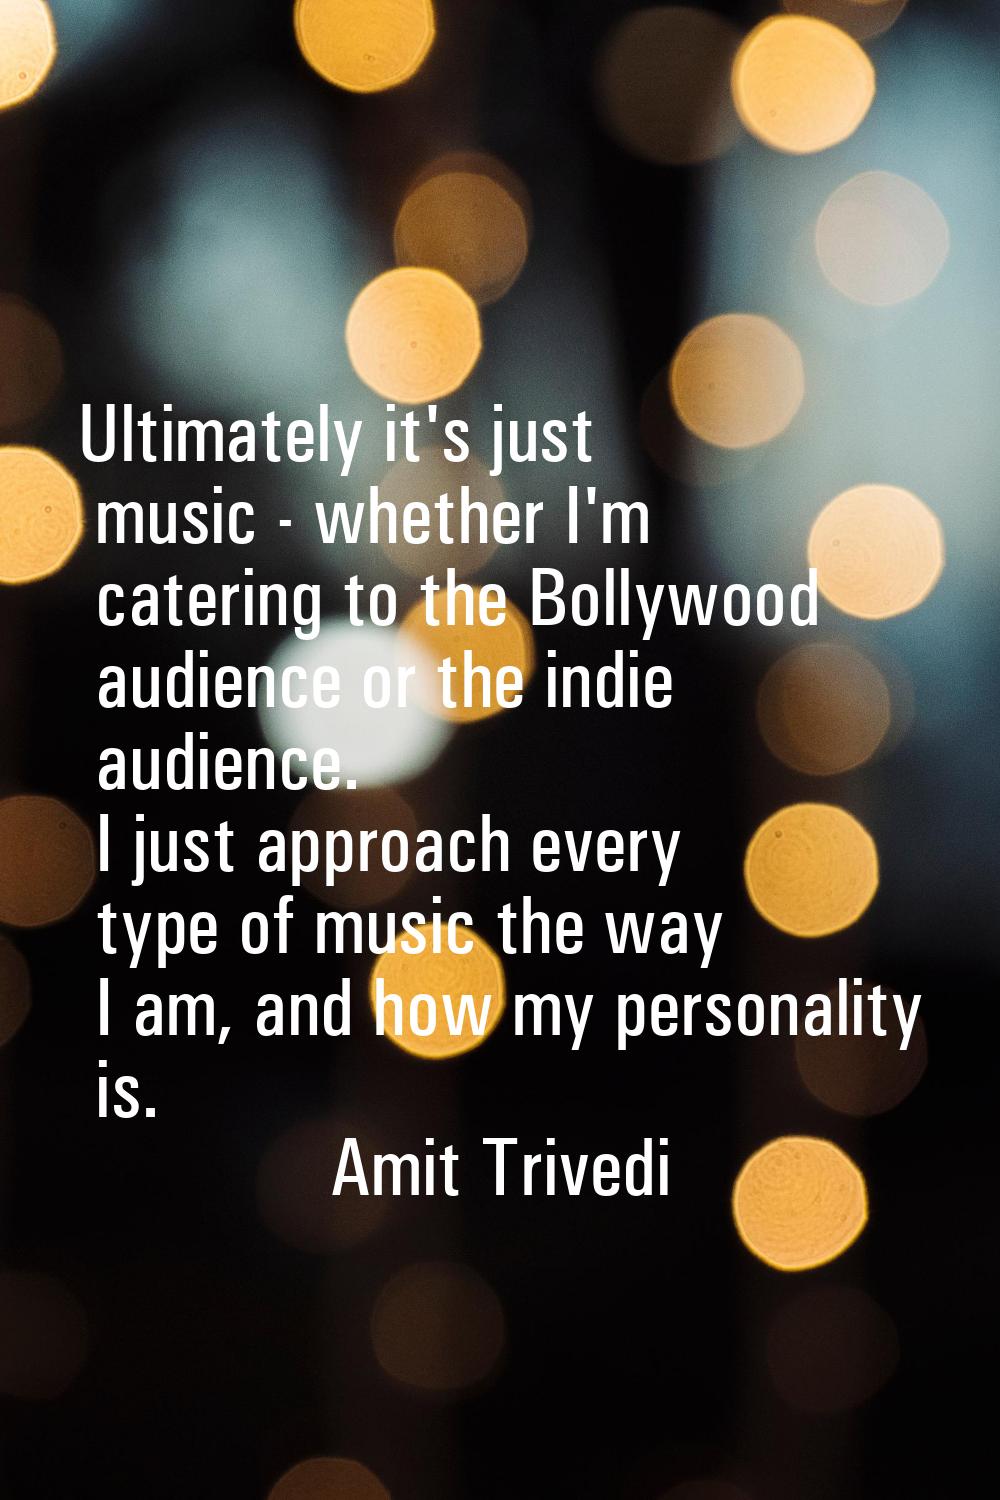 Ultimately it's just music - whether I'm catering to the Bollywood audience or the indie audience. 